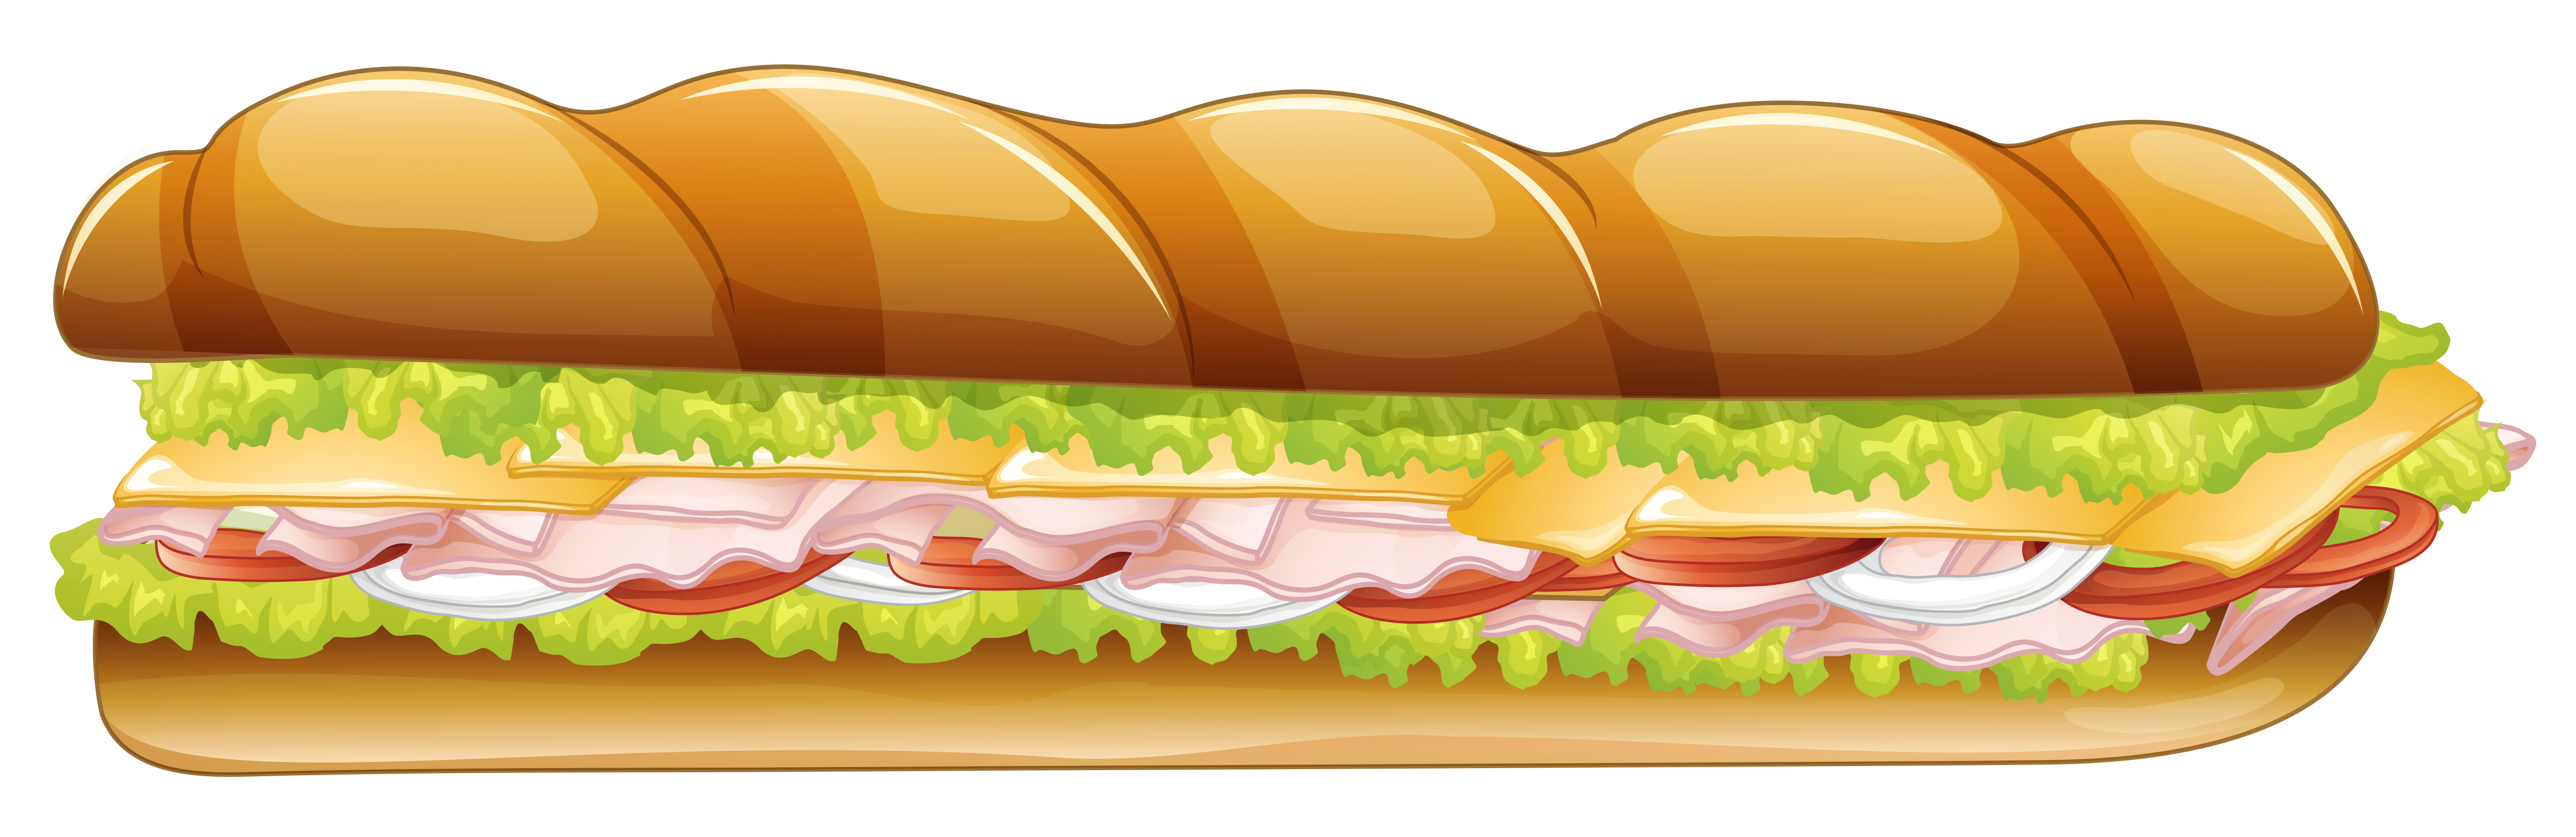 Long Sandwich PNG Vector Clipart Image | Gallery Yopriceville - High